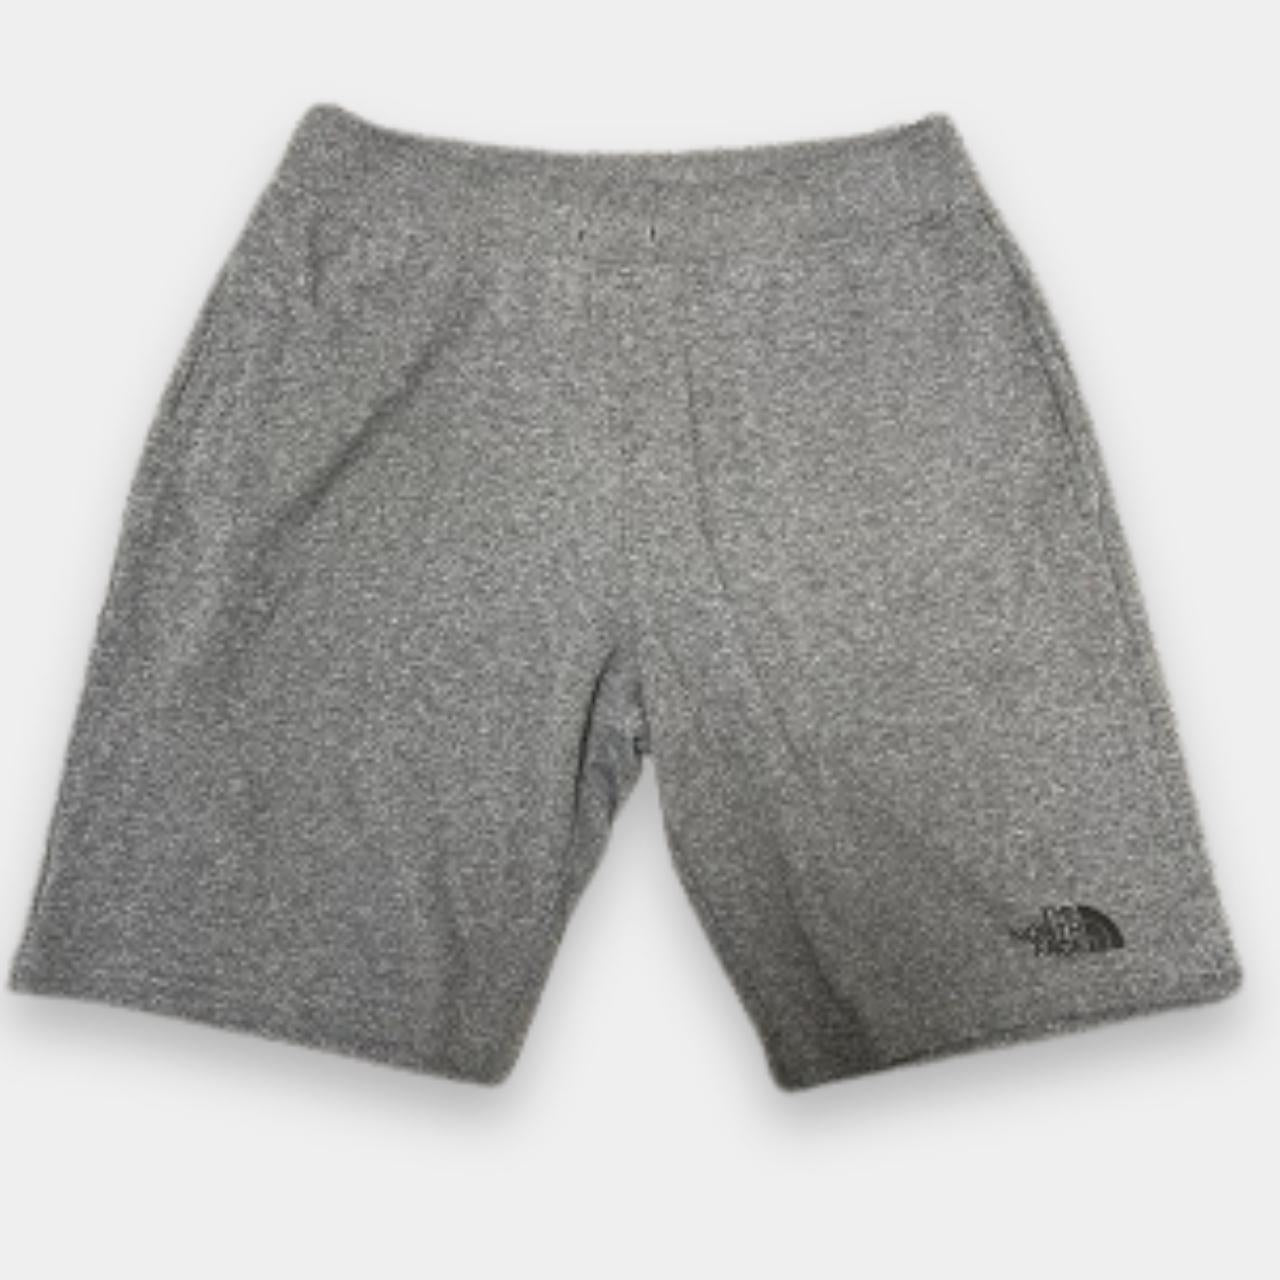 Vintage the north face grey shorts for men